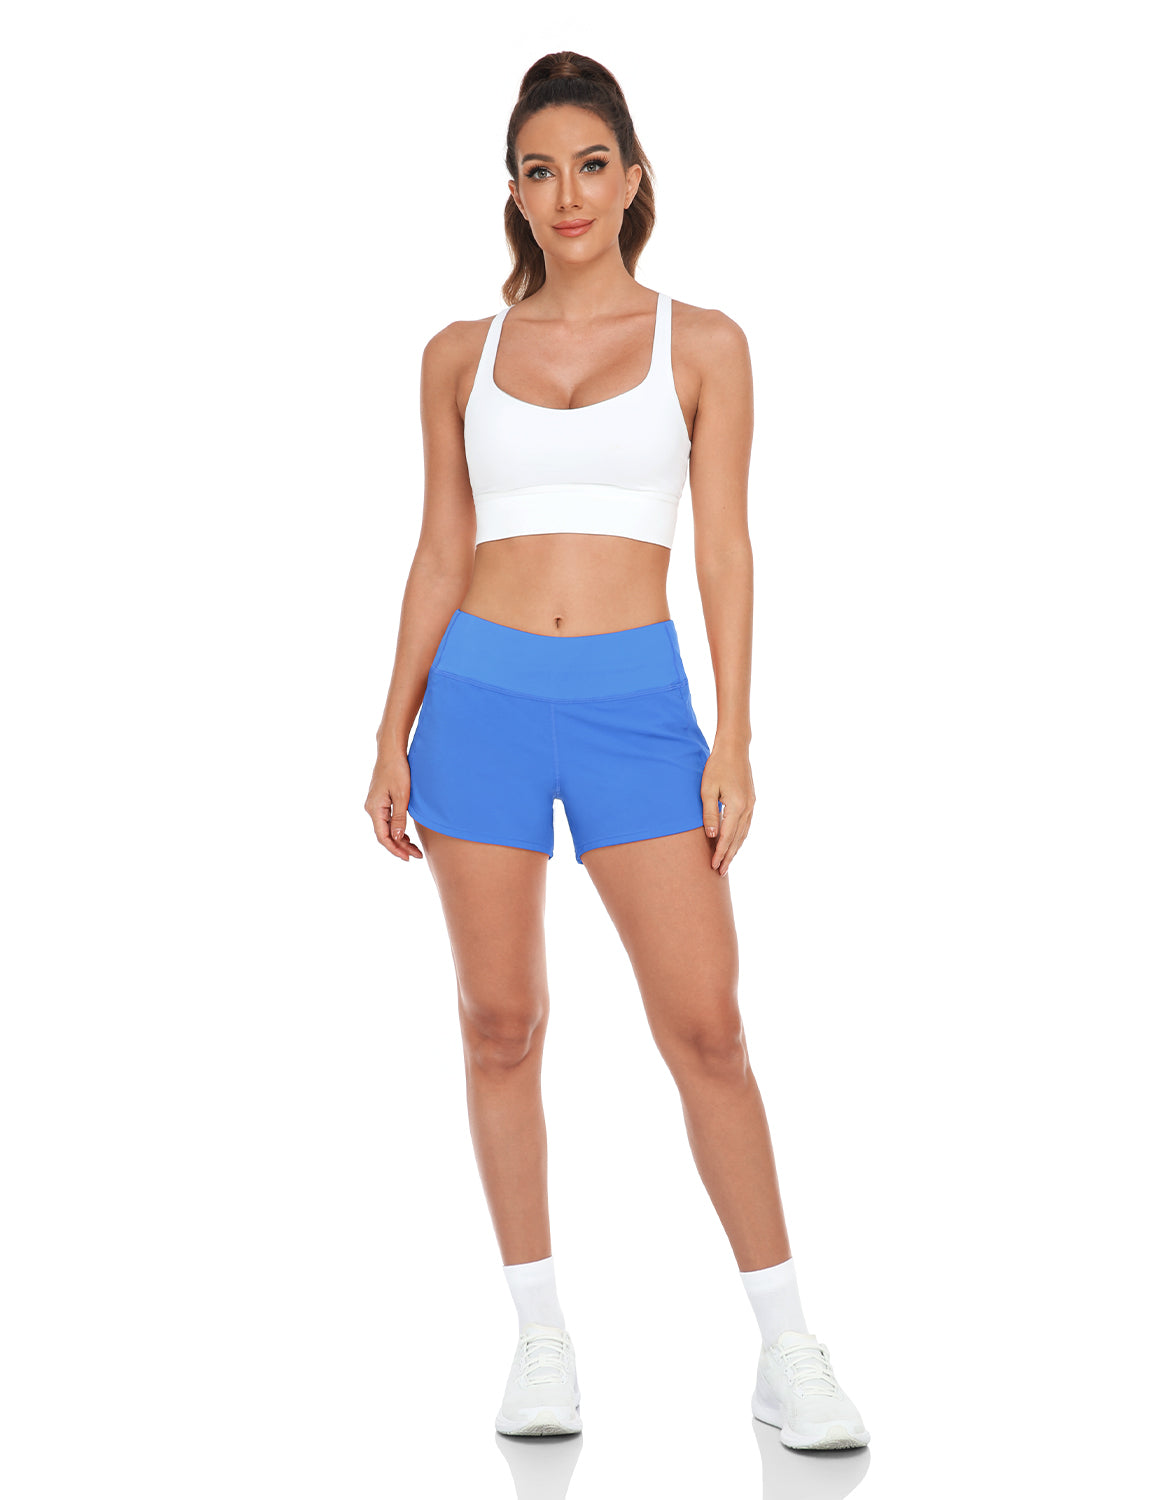  HeyNuts Focus Running Shorts For Women, Mid Waisted